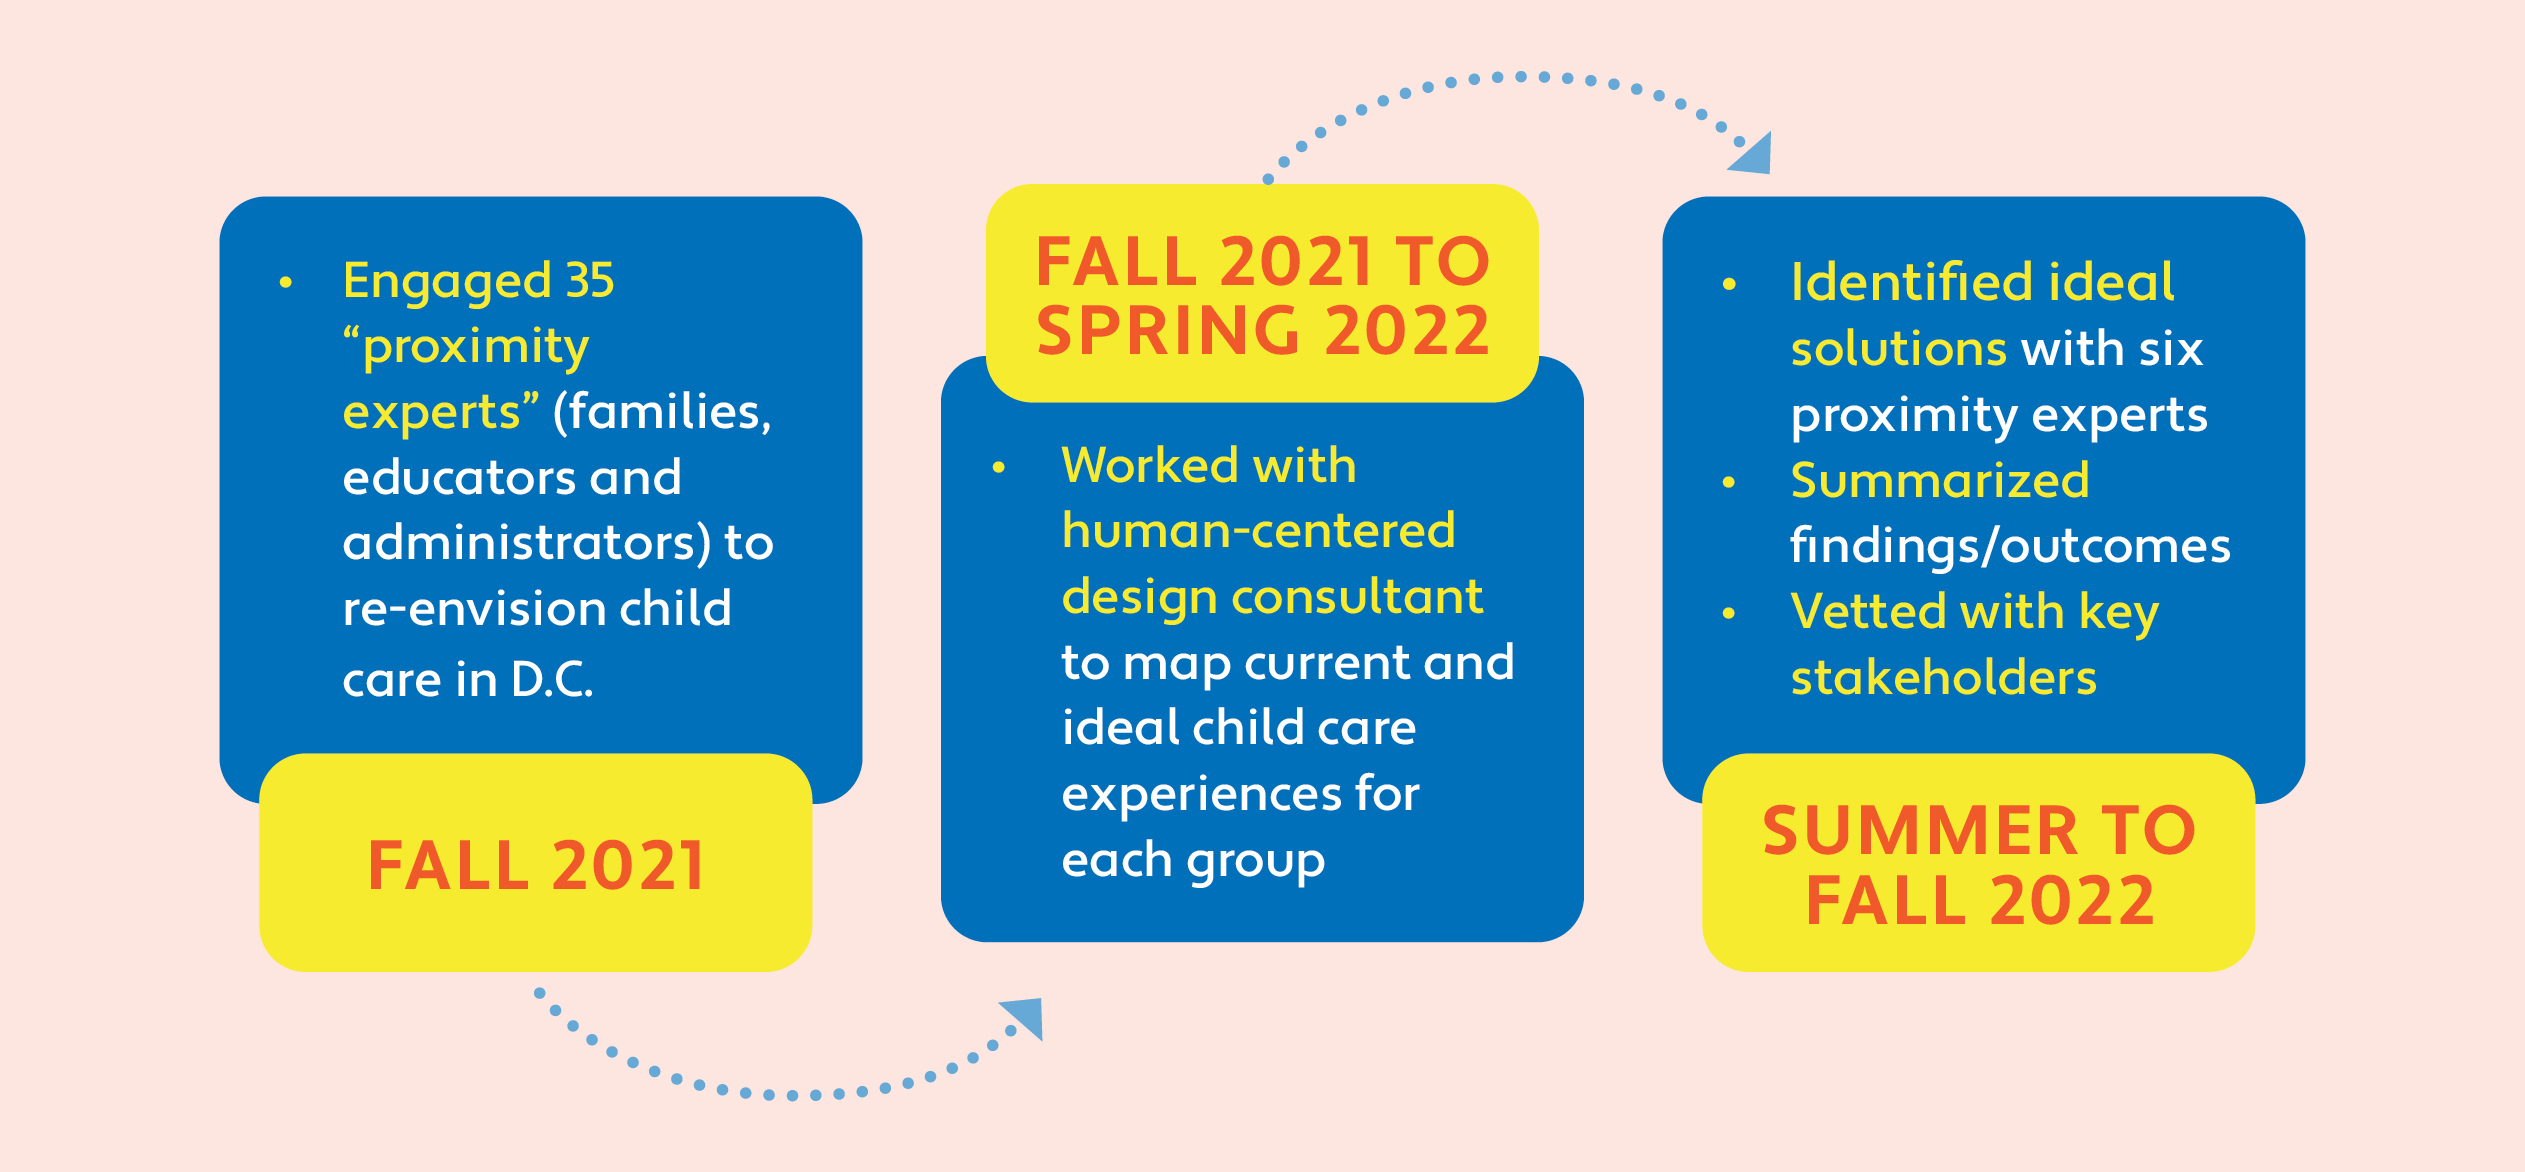 three-column flow chart describing WeVision EarlyEd's process. starts in fall 2021 where proximity experts were engaged, moves to fall 2021 to springs 2022 where they mapped current and ideal child care experiences, ends with summer to fall 2022 where they identified solutions and met with stakeholders